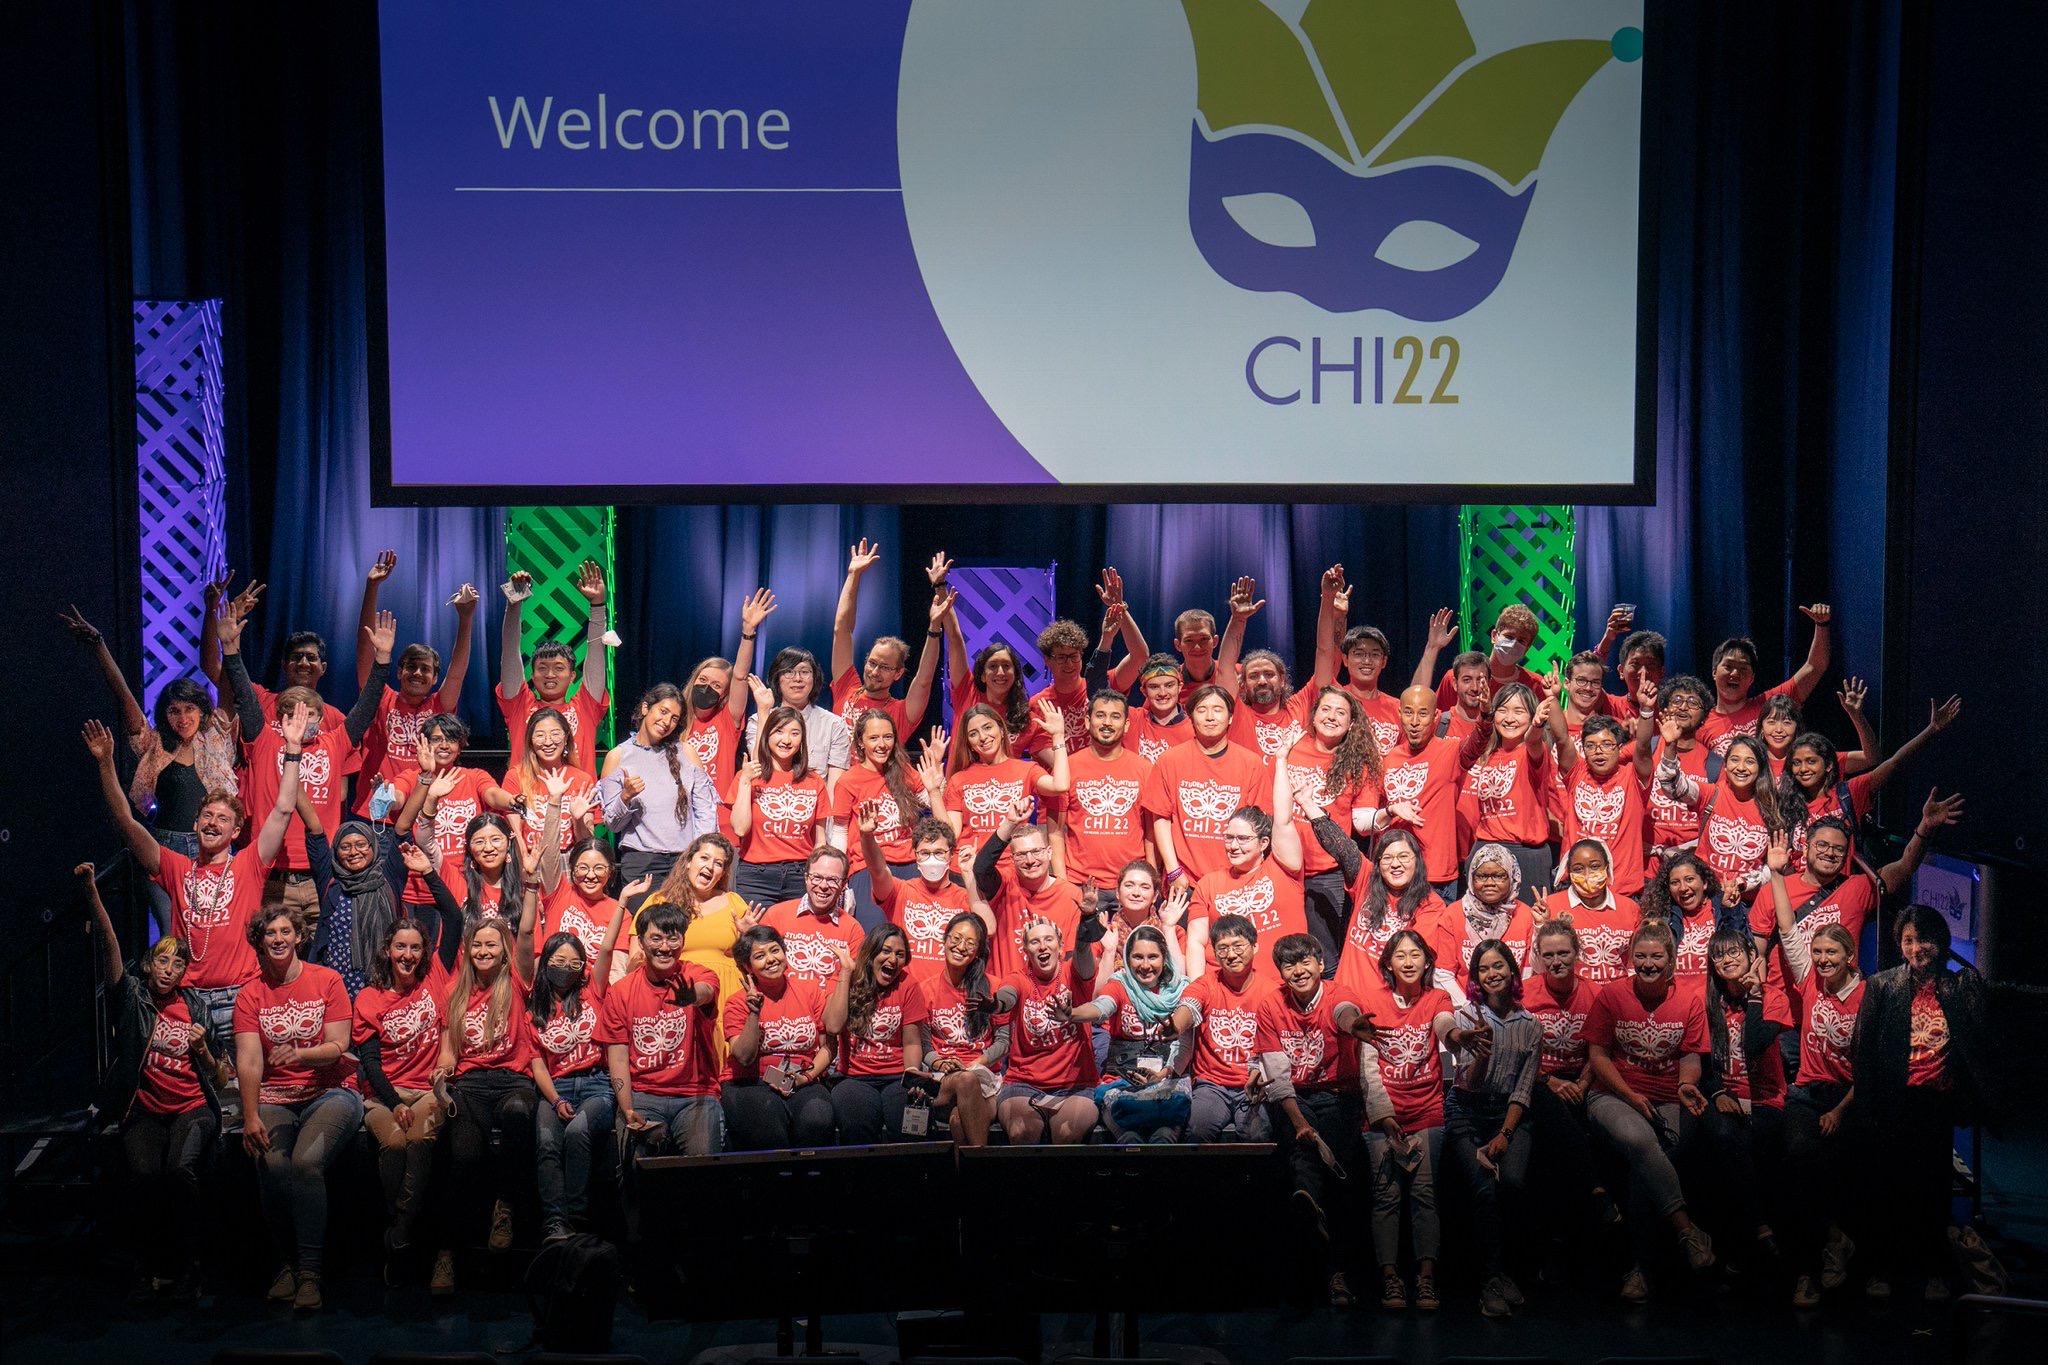 Me (second line, third one from left) as an in-person student volunteer at ACM CHI 2022 in New Orleans